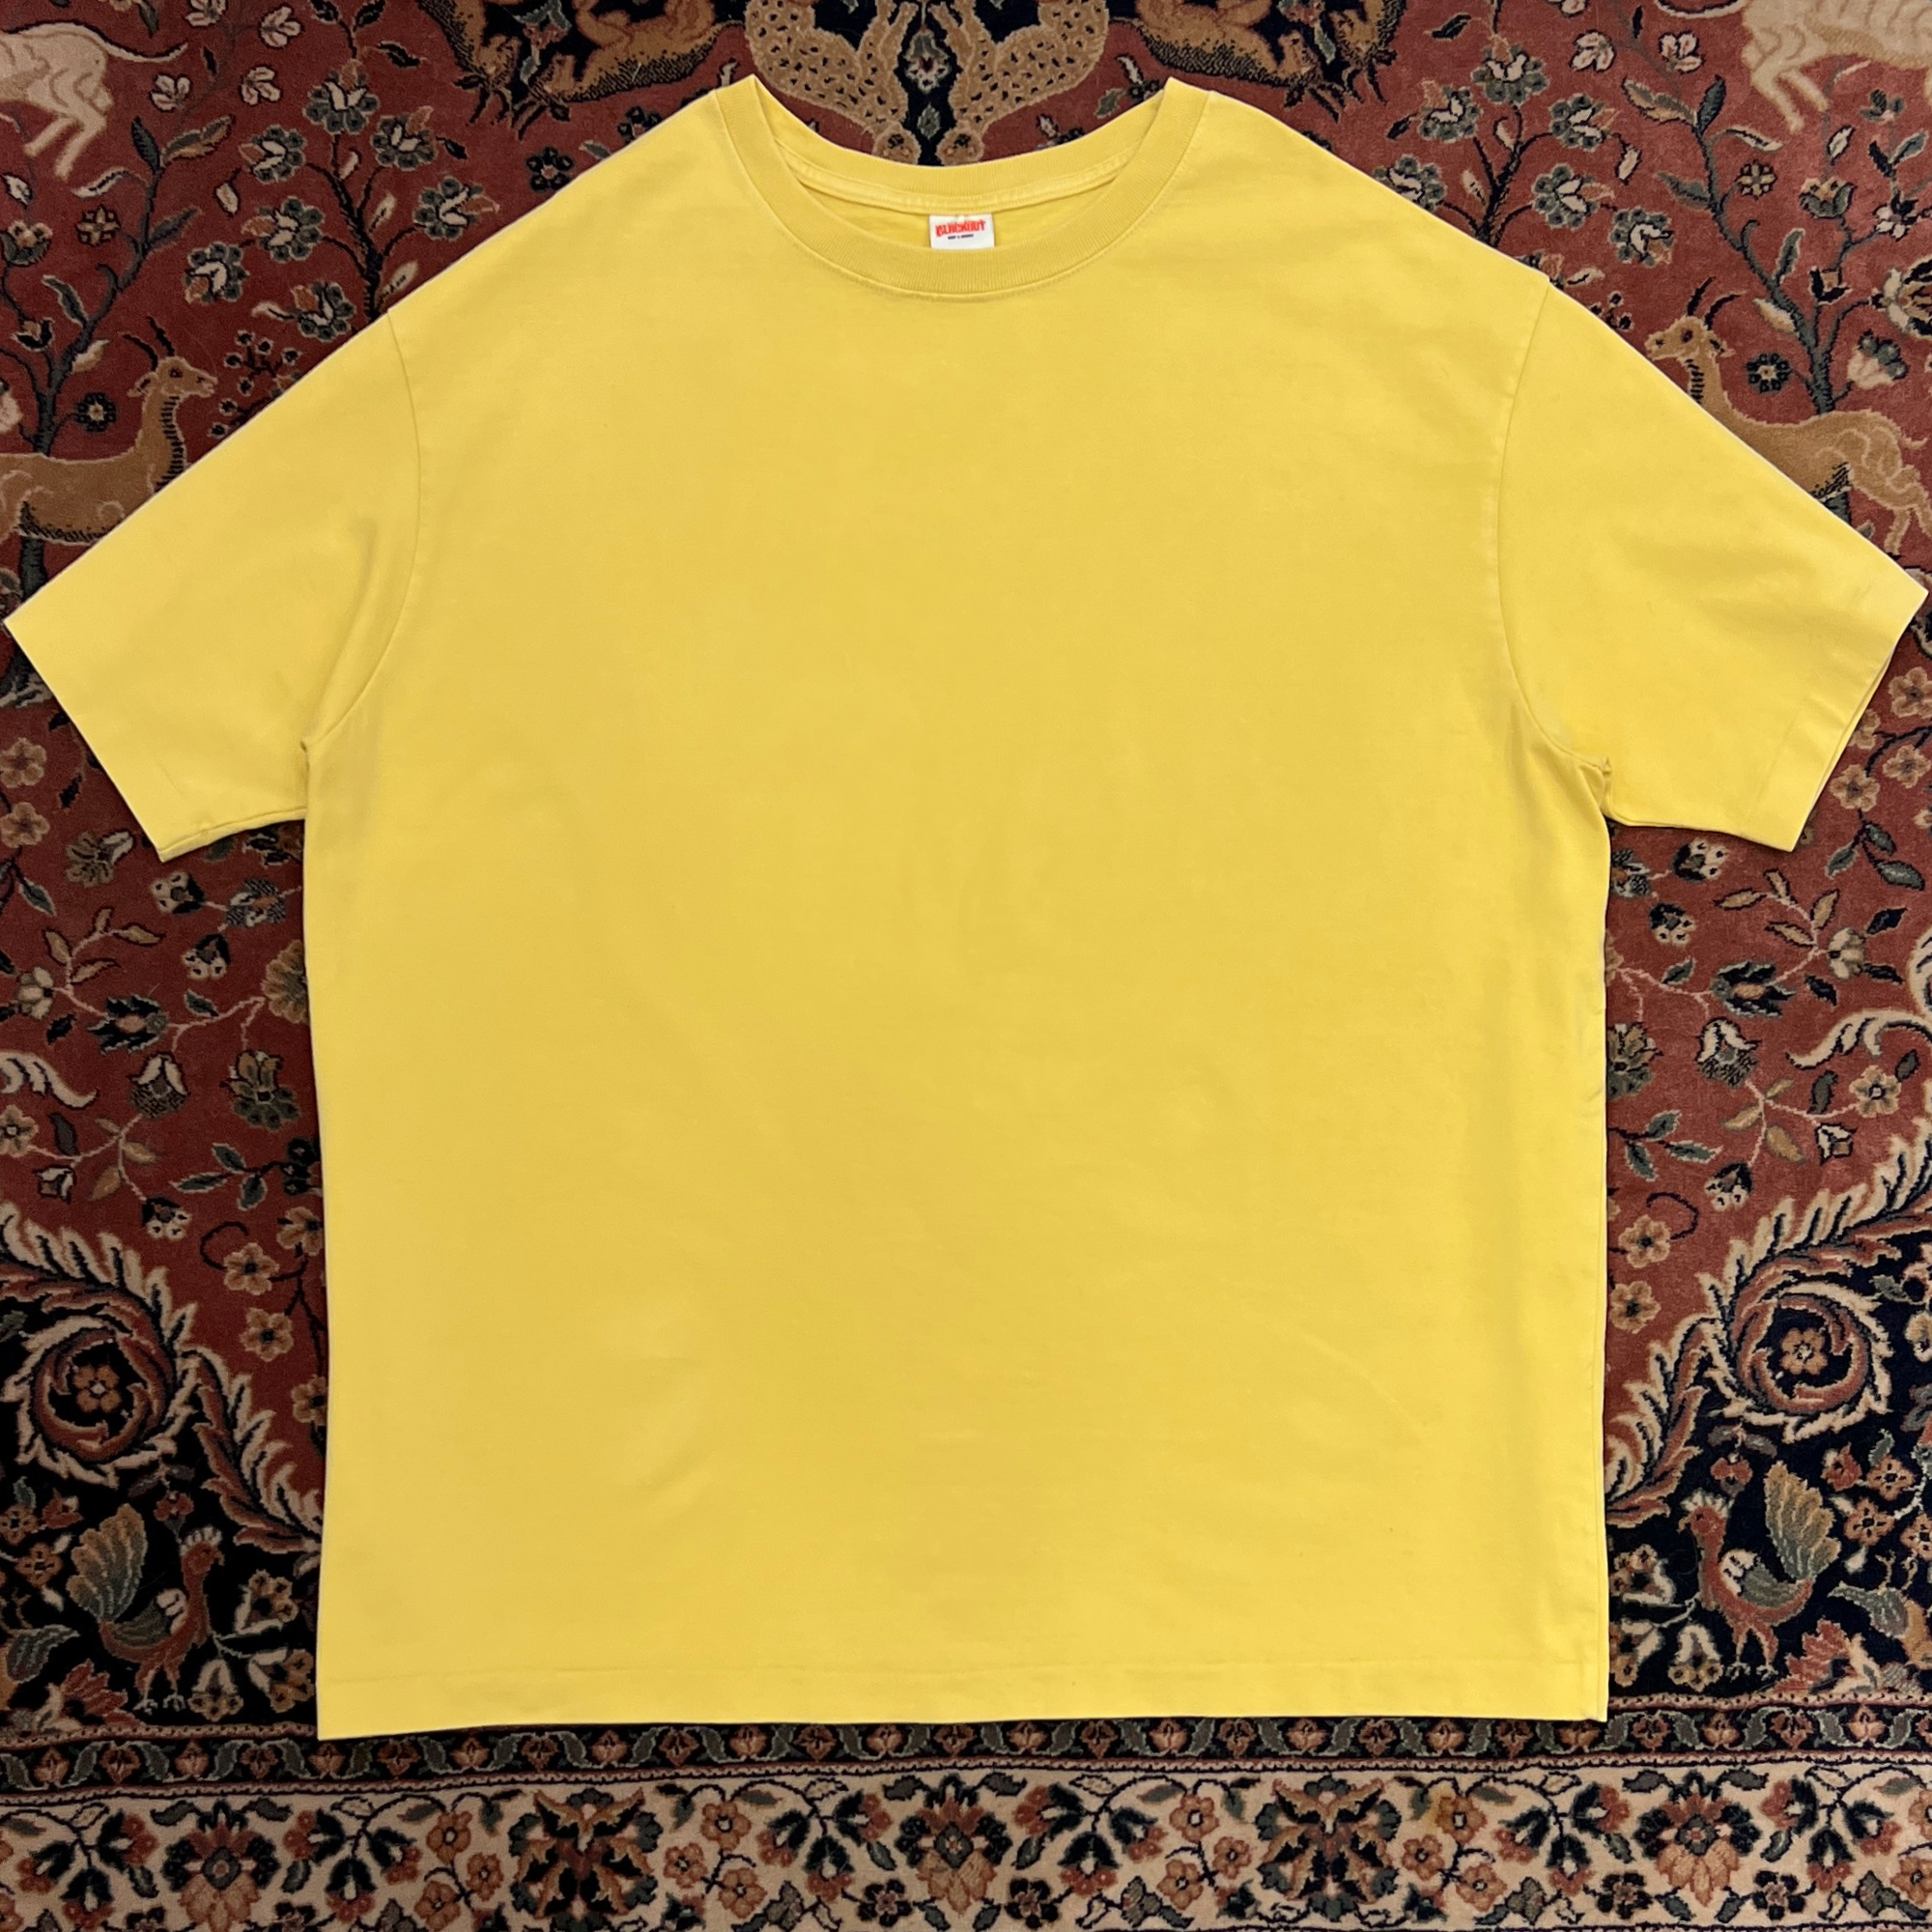 Dyed t shirt